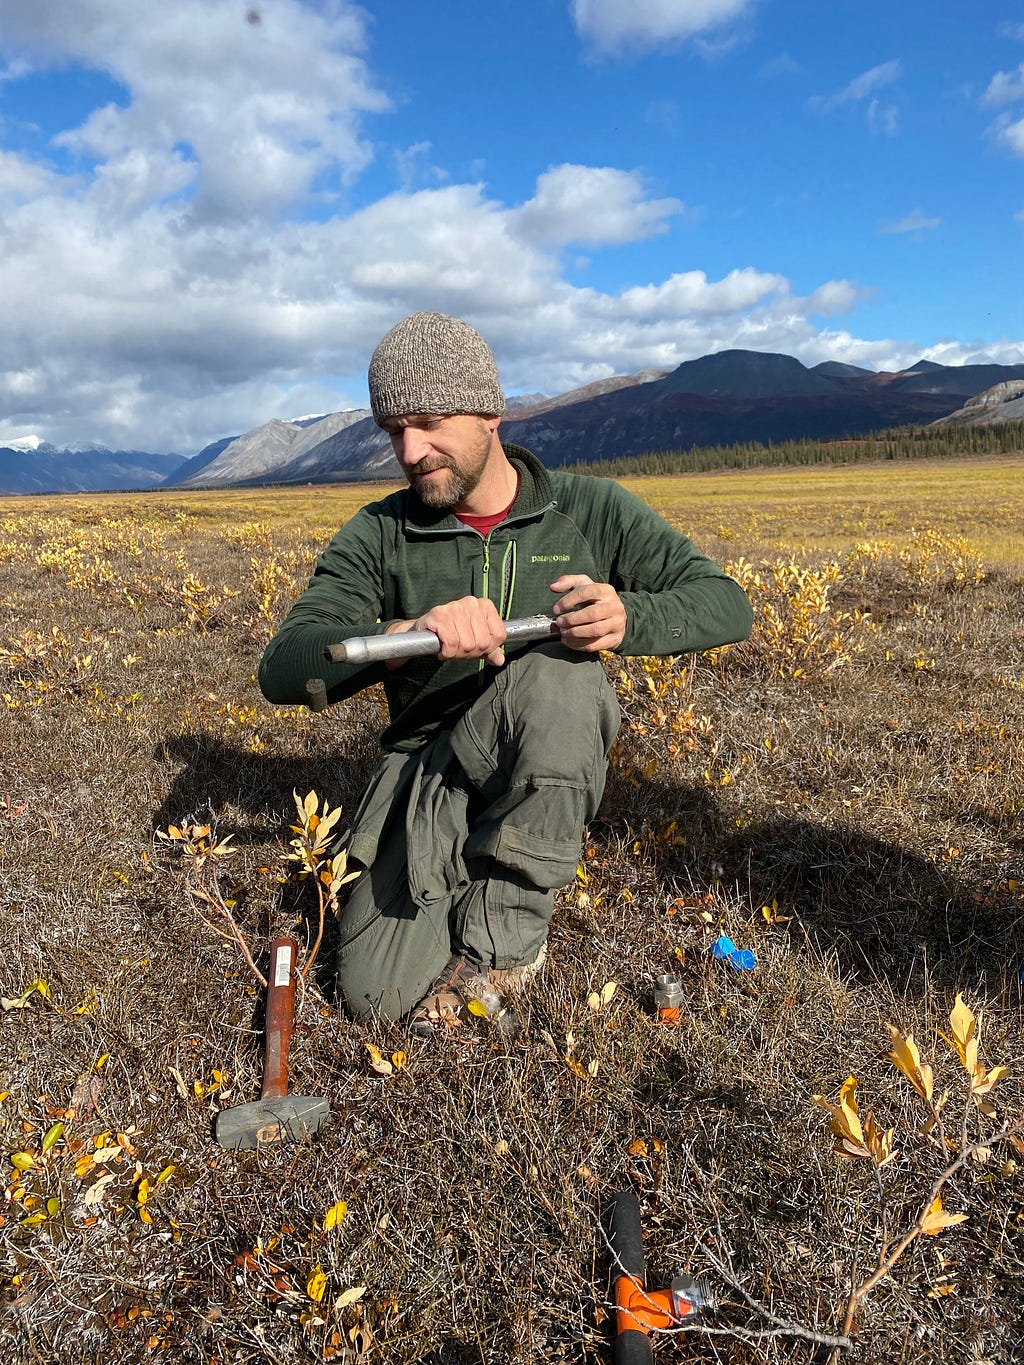 A man with a soil core sampler on an open landscape with mountains in the distance.